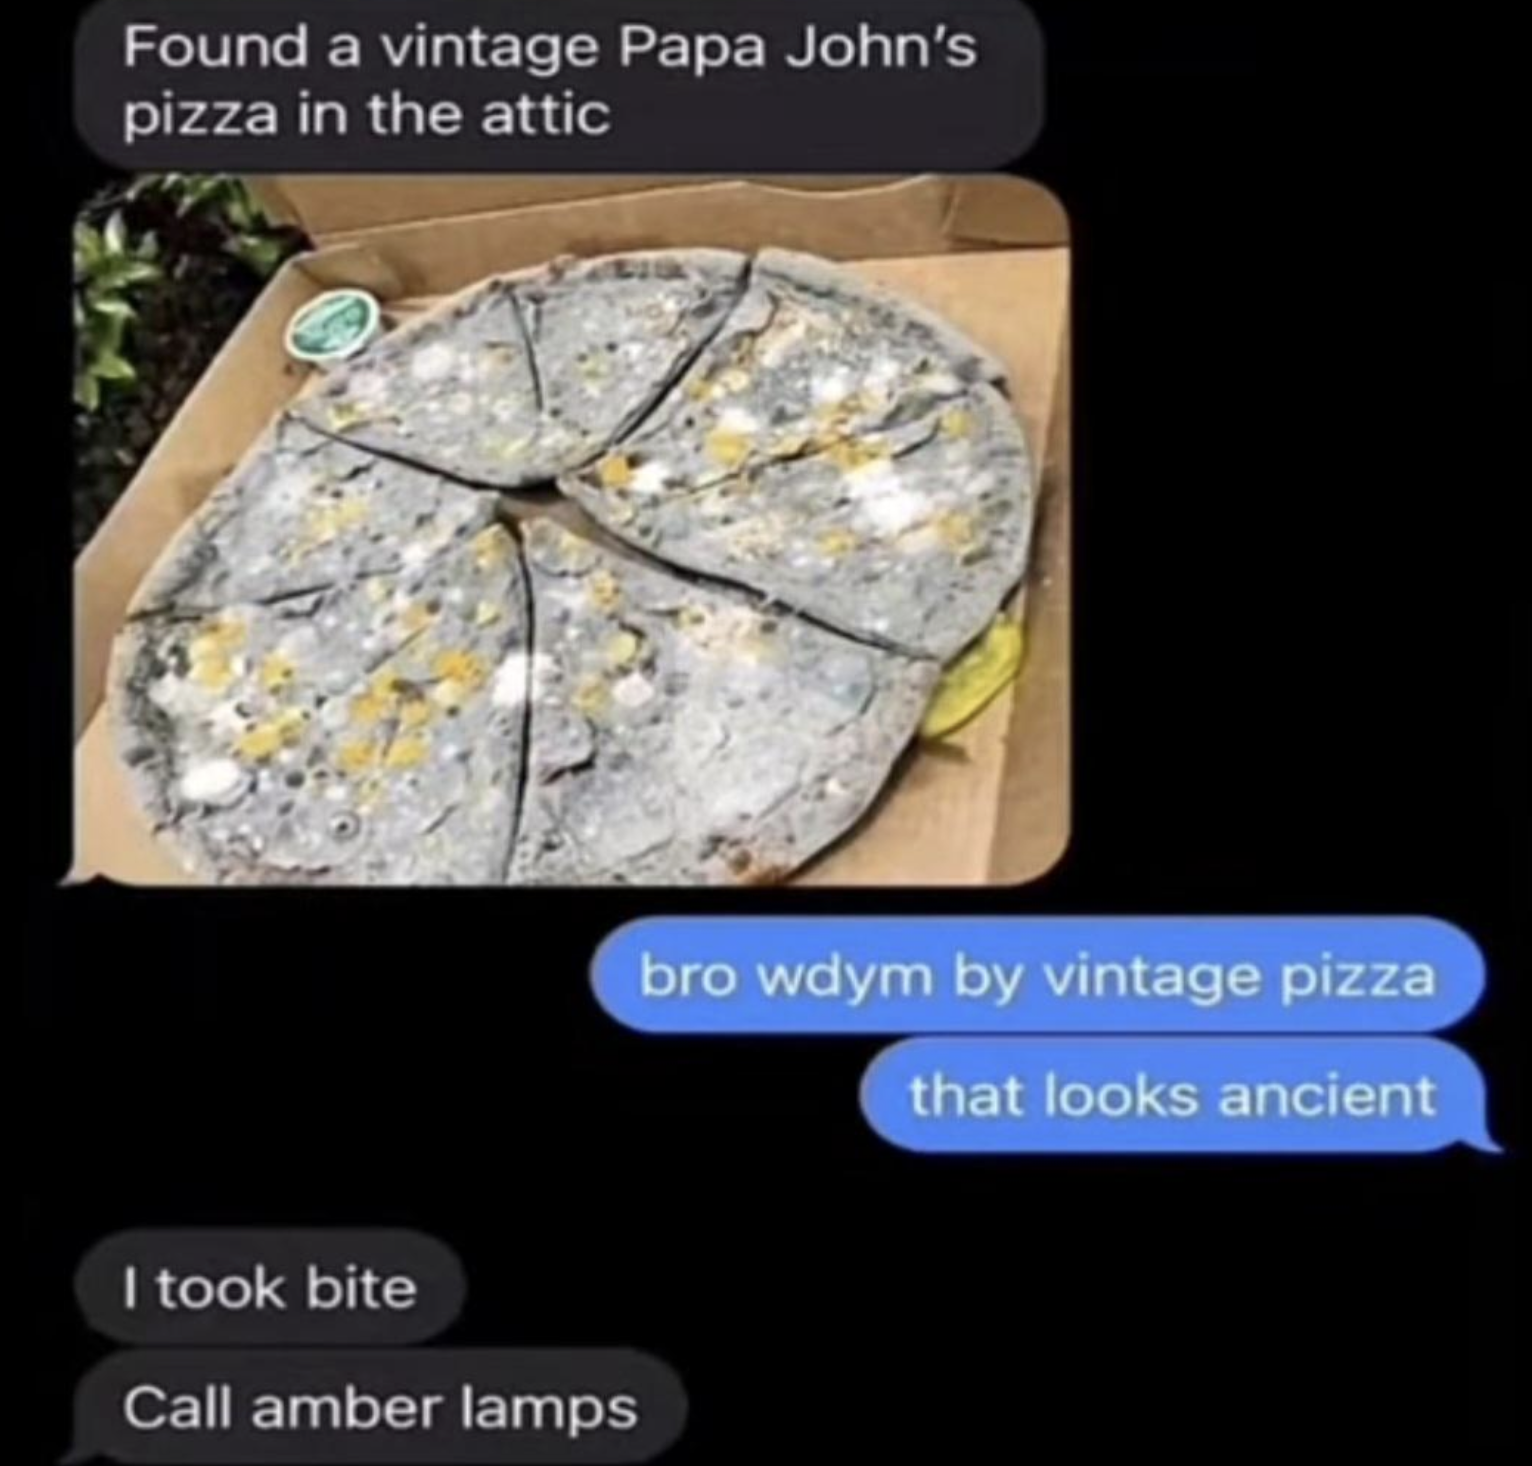 vintage papa john's pizza meme - Found a vintage Papa John's pizza in the attic I took bite Call amber lamps bro wdym by vintage pizza that looks ancient